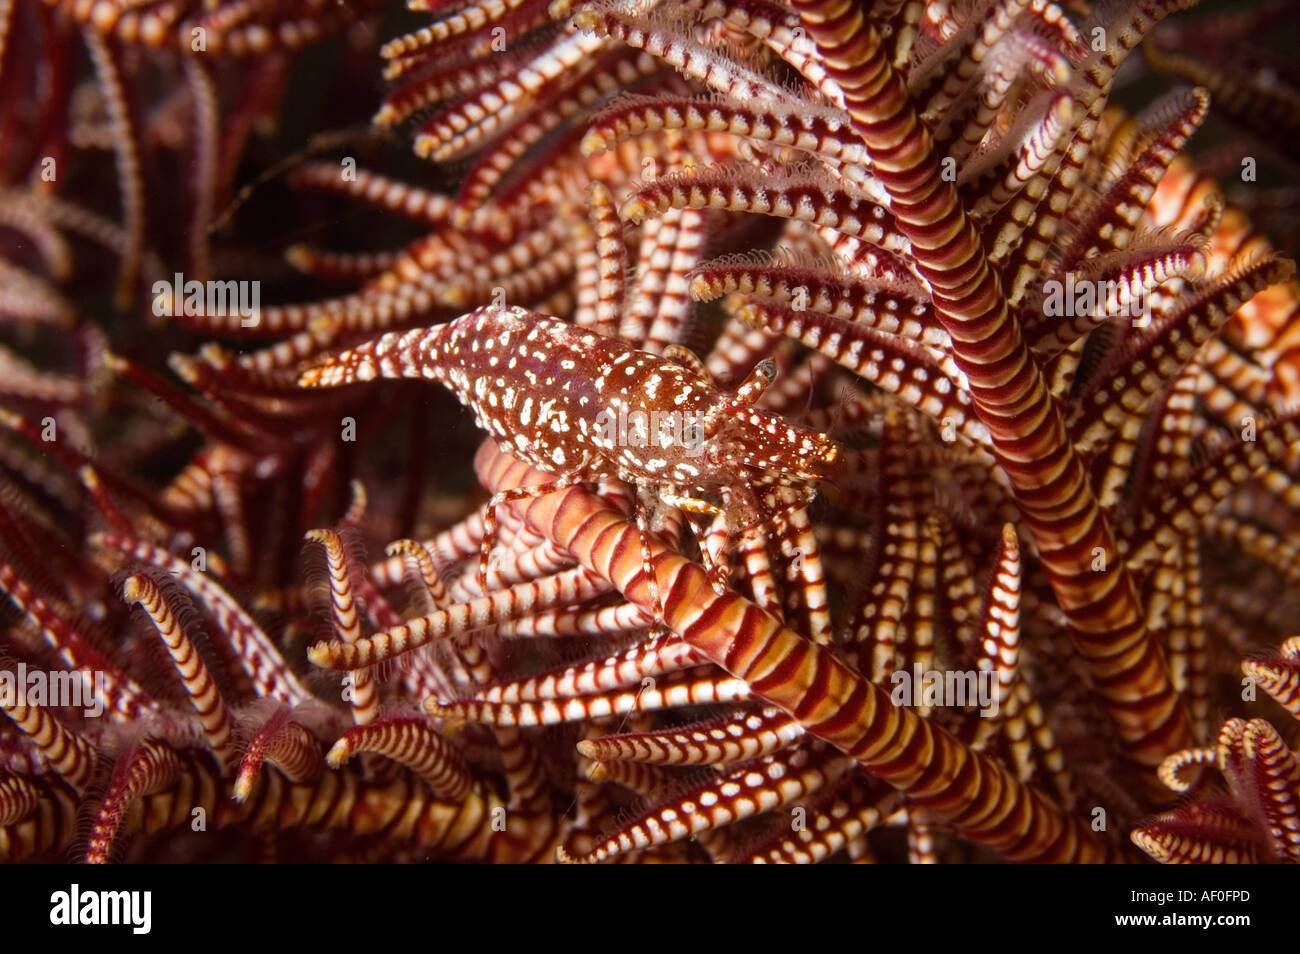 Commensal shrimp, Periclimenes commensalis, camouflaging on a feather star, Bali Indonesia. Stock Photo